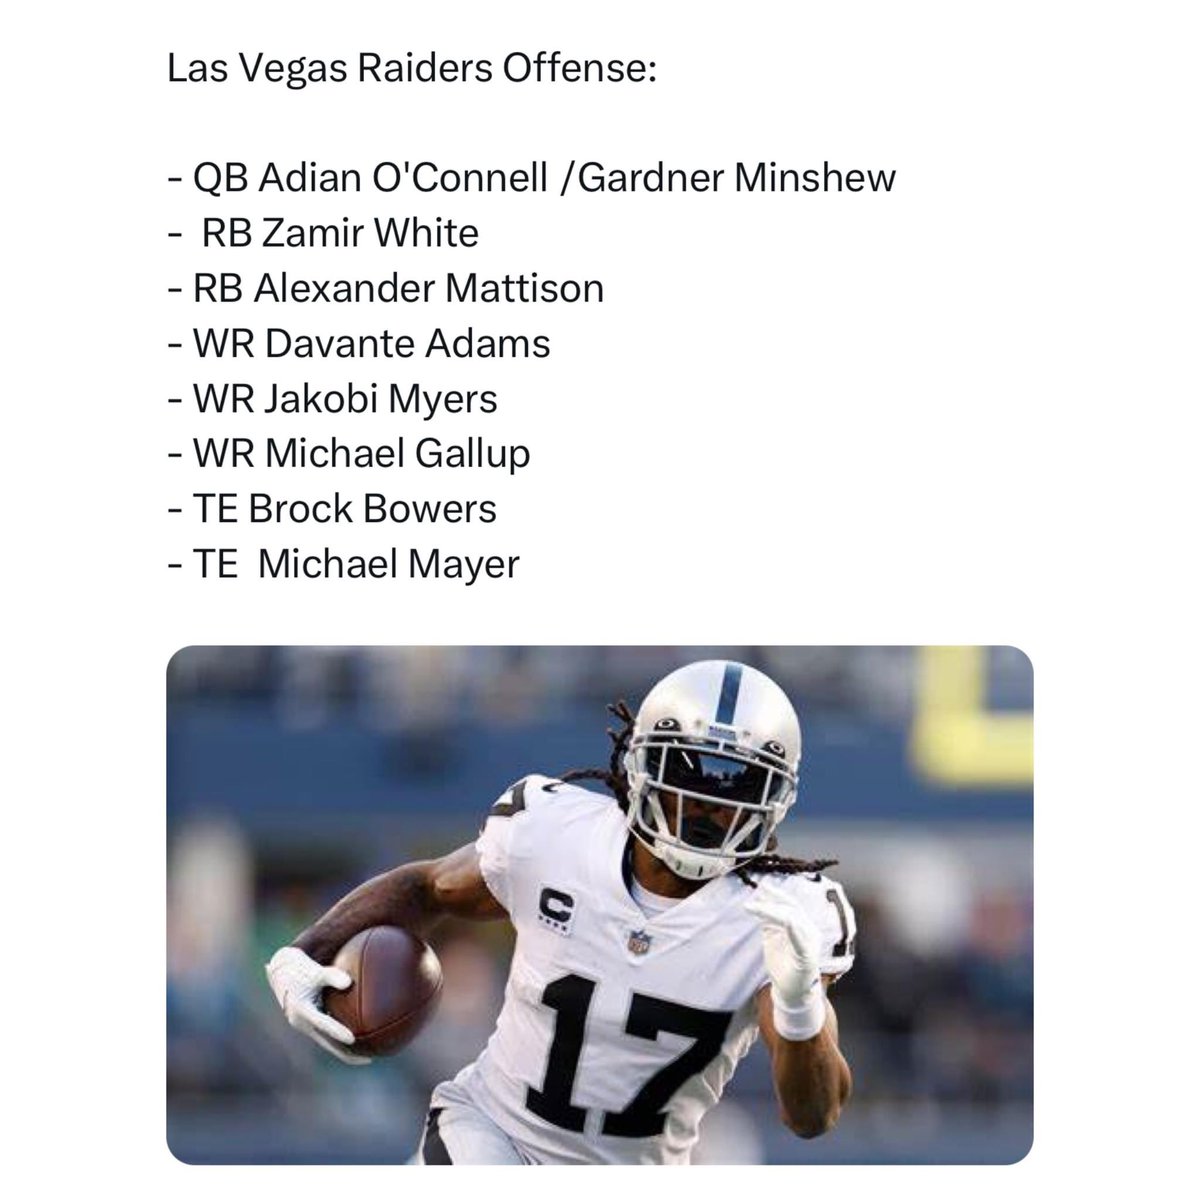 The Raiders stacked the offense so much, all the QB has to do is show up and take care of the ball. Minimize turnovers and this offense will go CRAZY! 💯🏴‍☠️ #RaiderNation